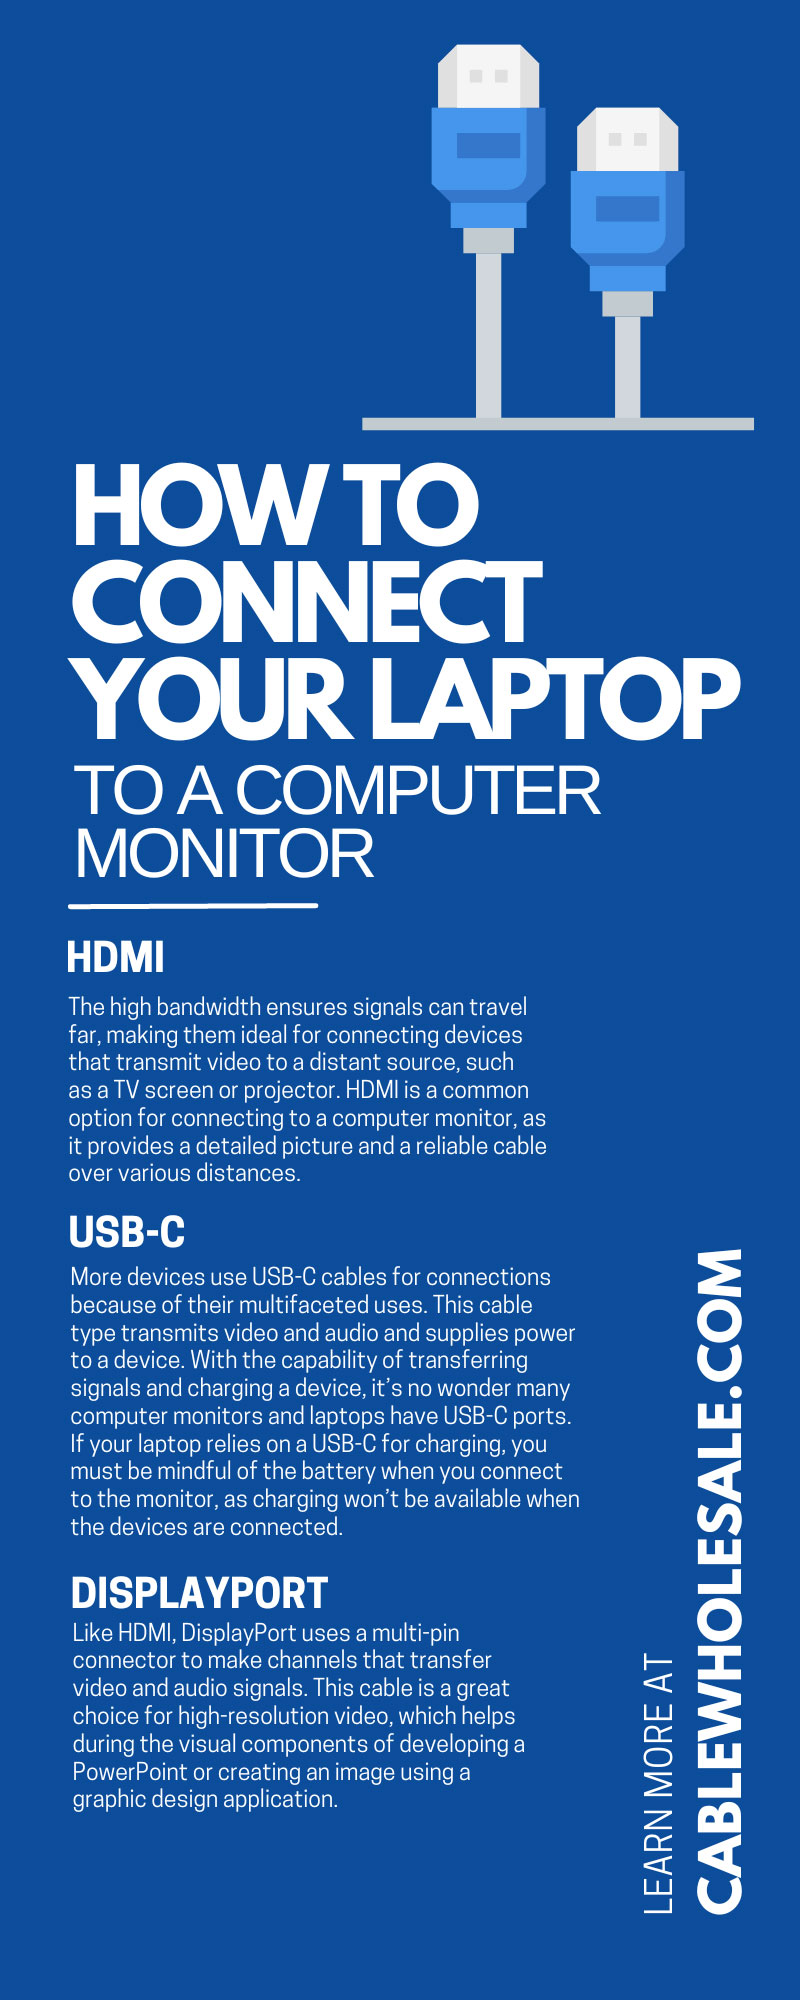 How To Connect Your Laptop to a Computer Monitor